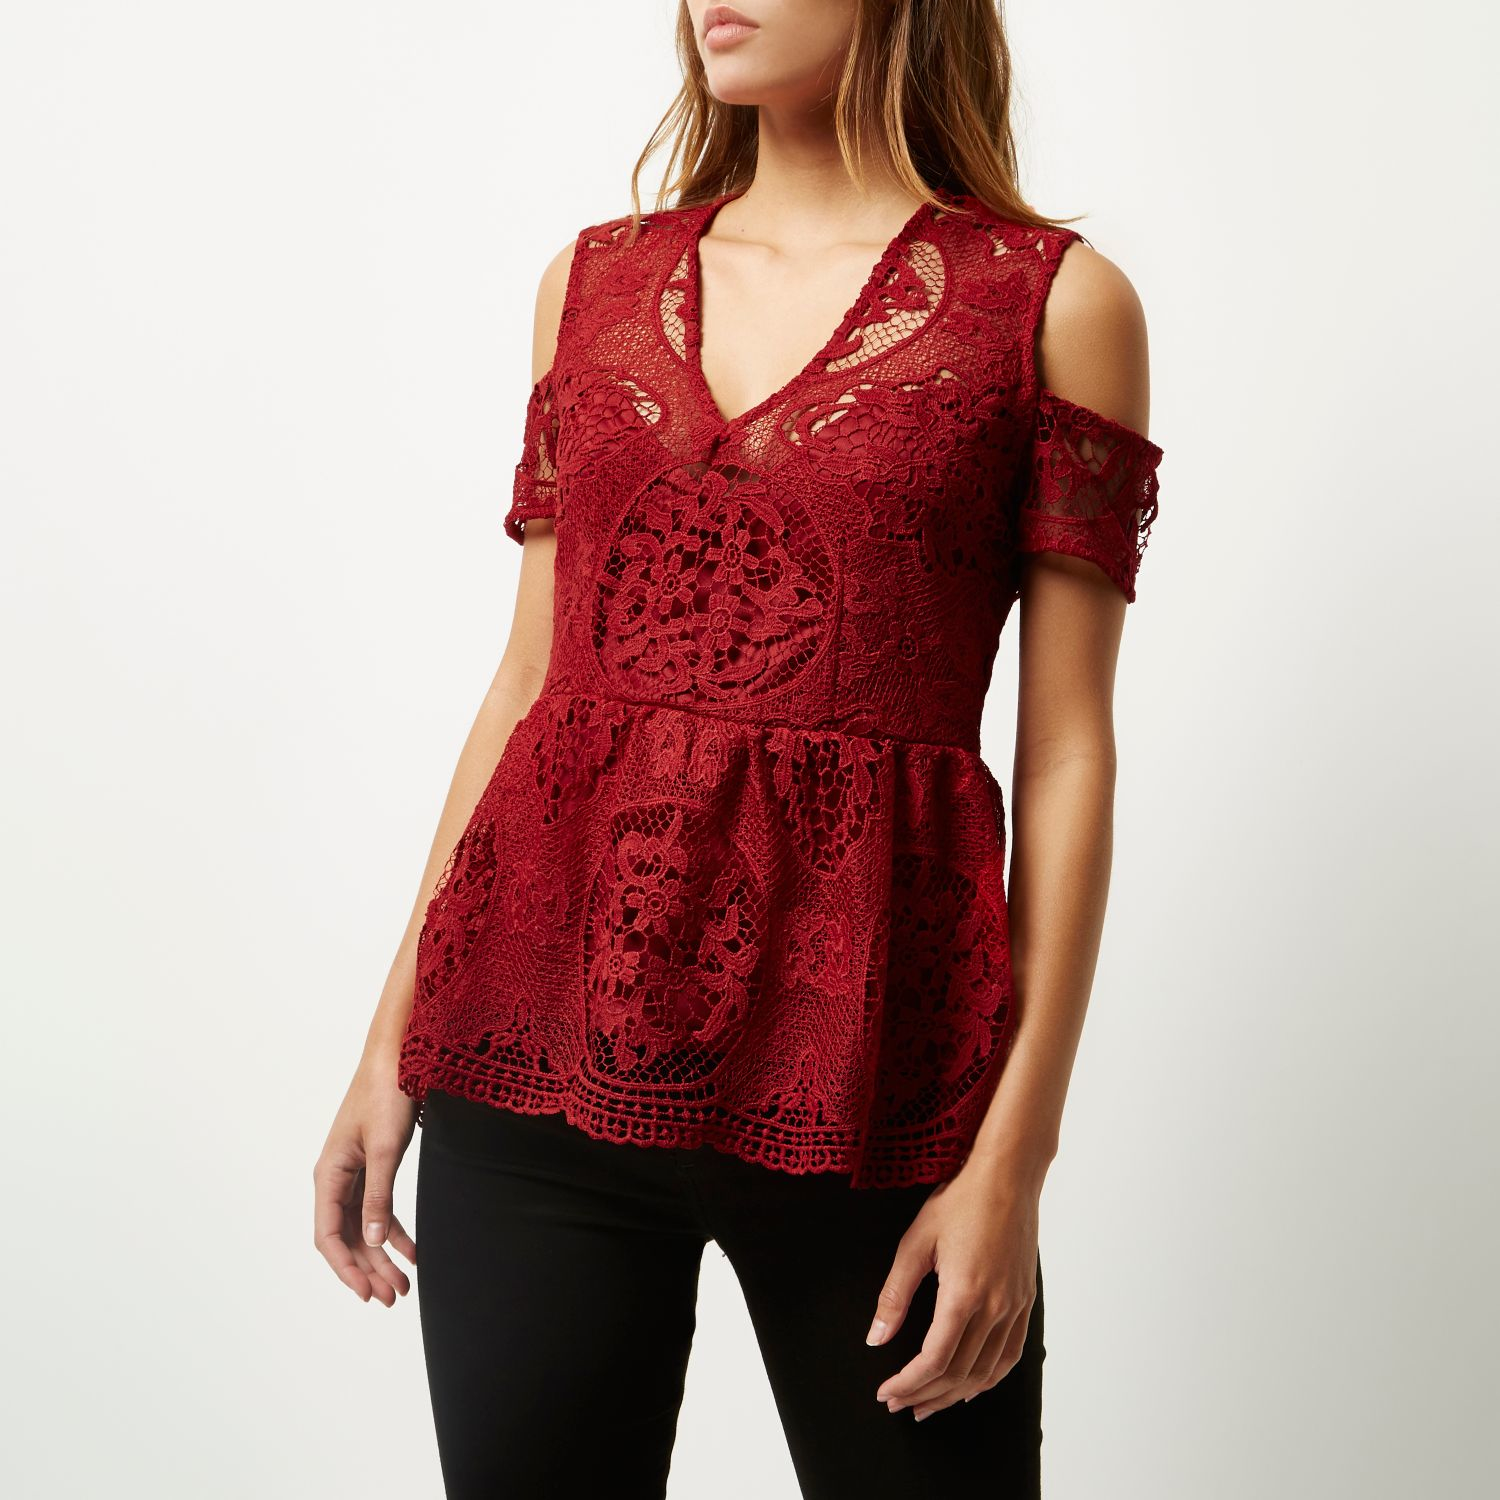 River Island Red Lace Peplum Top in Red - Lyst